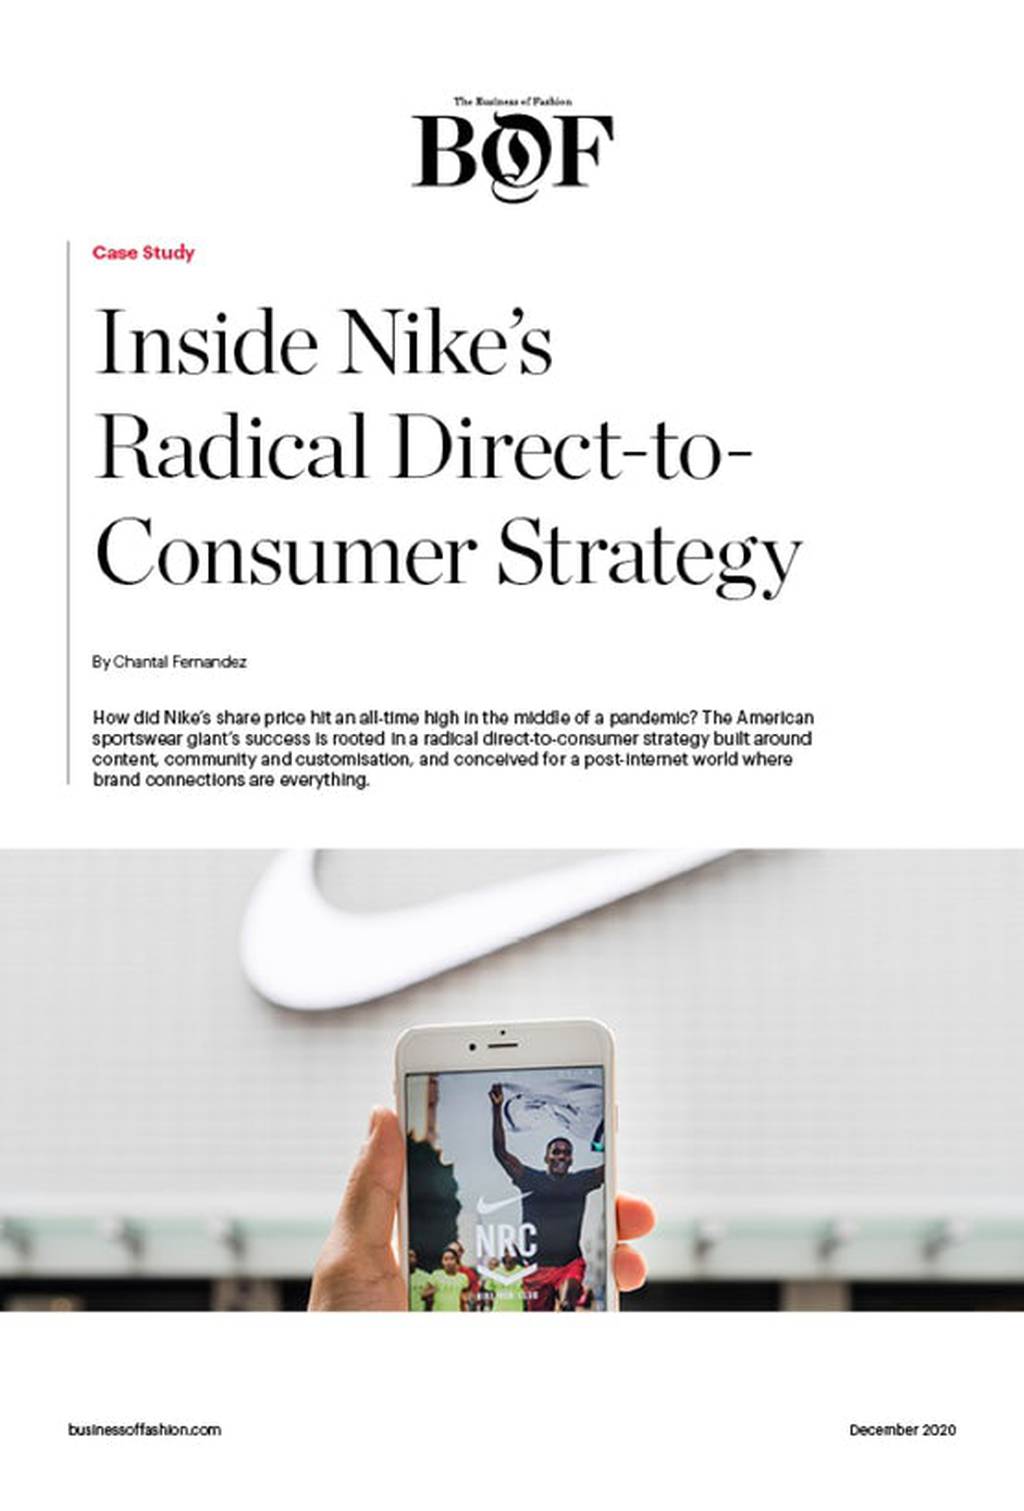 Inside Nike's Radical Direct-to-Consumer Strategy Case Study